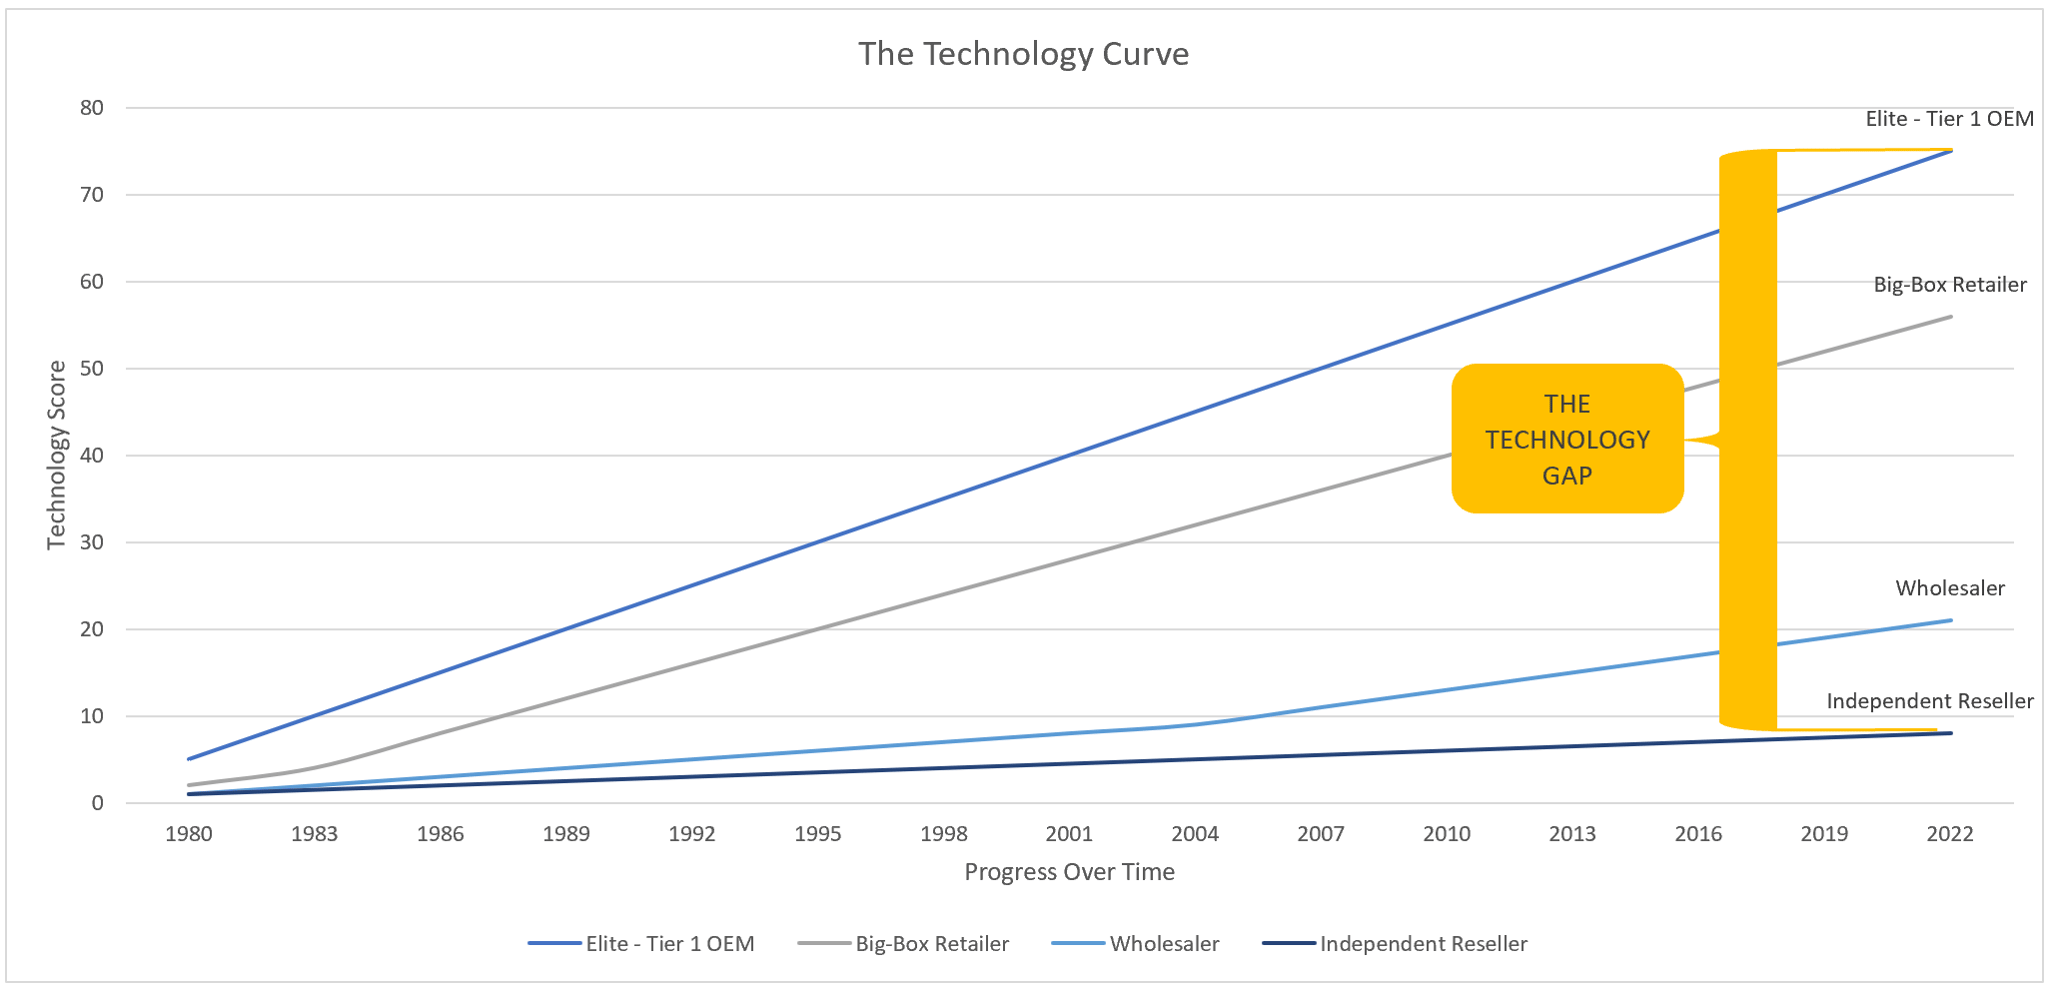 The Technology Curve